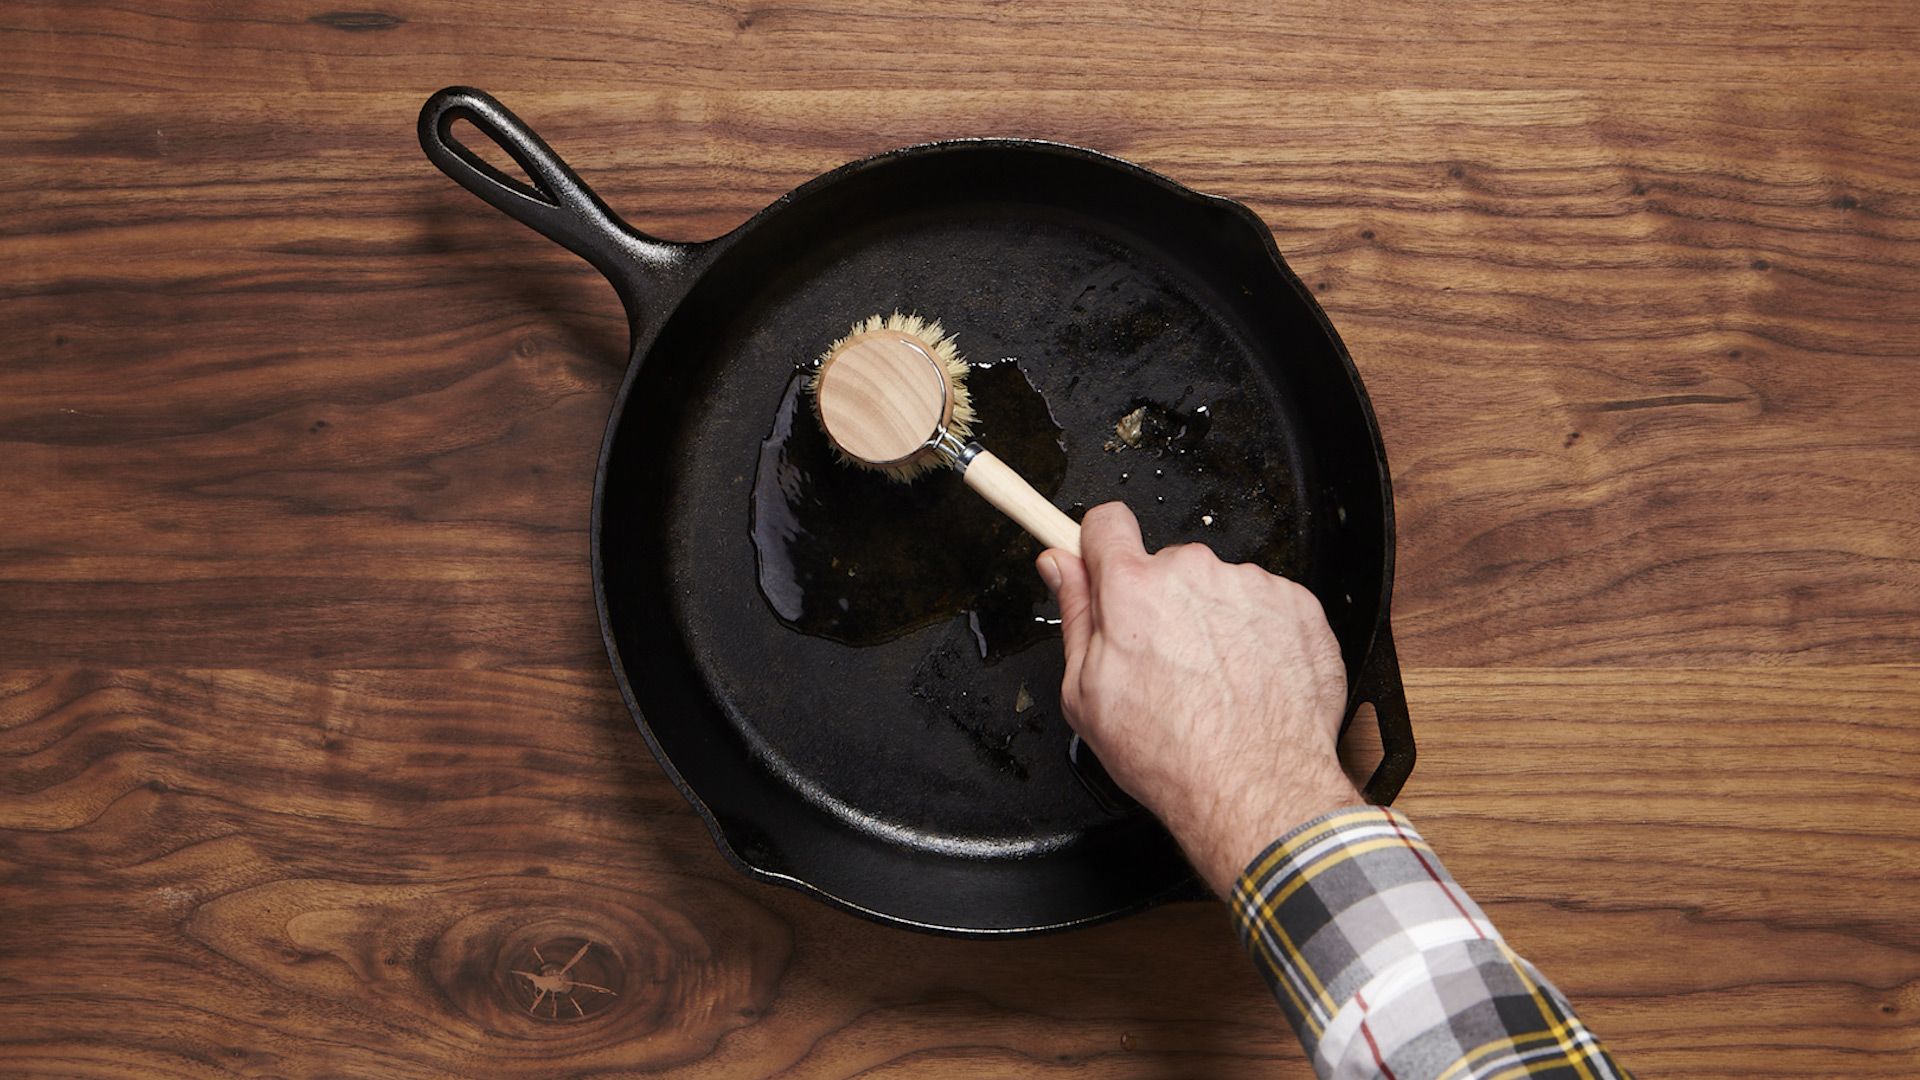 Do not fear! How to Clean a Cast Iron Skillet is Here - Tidbits